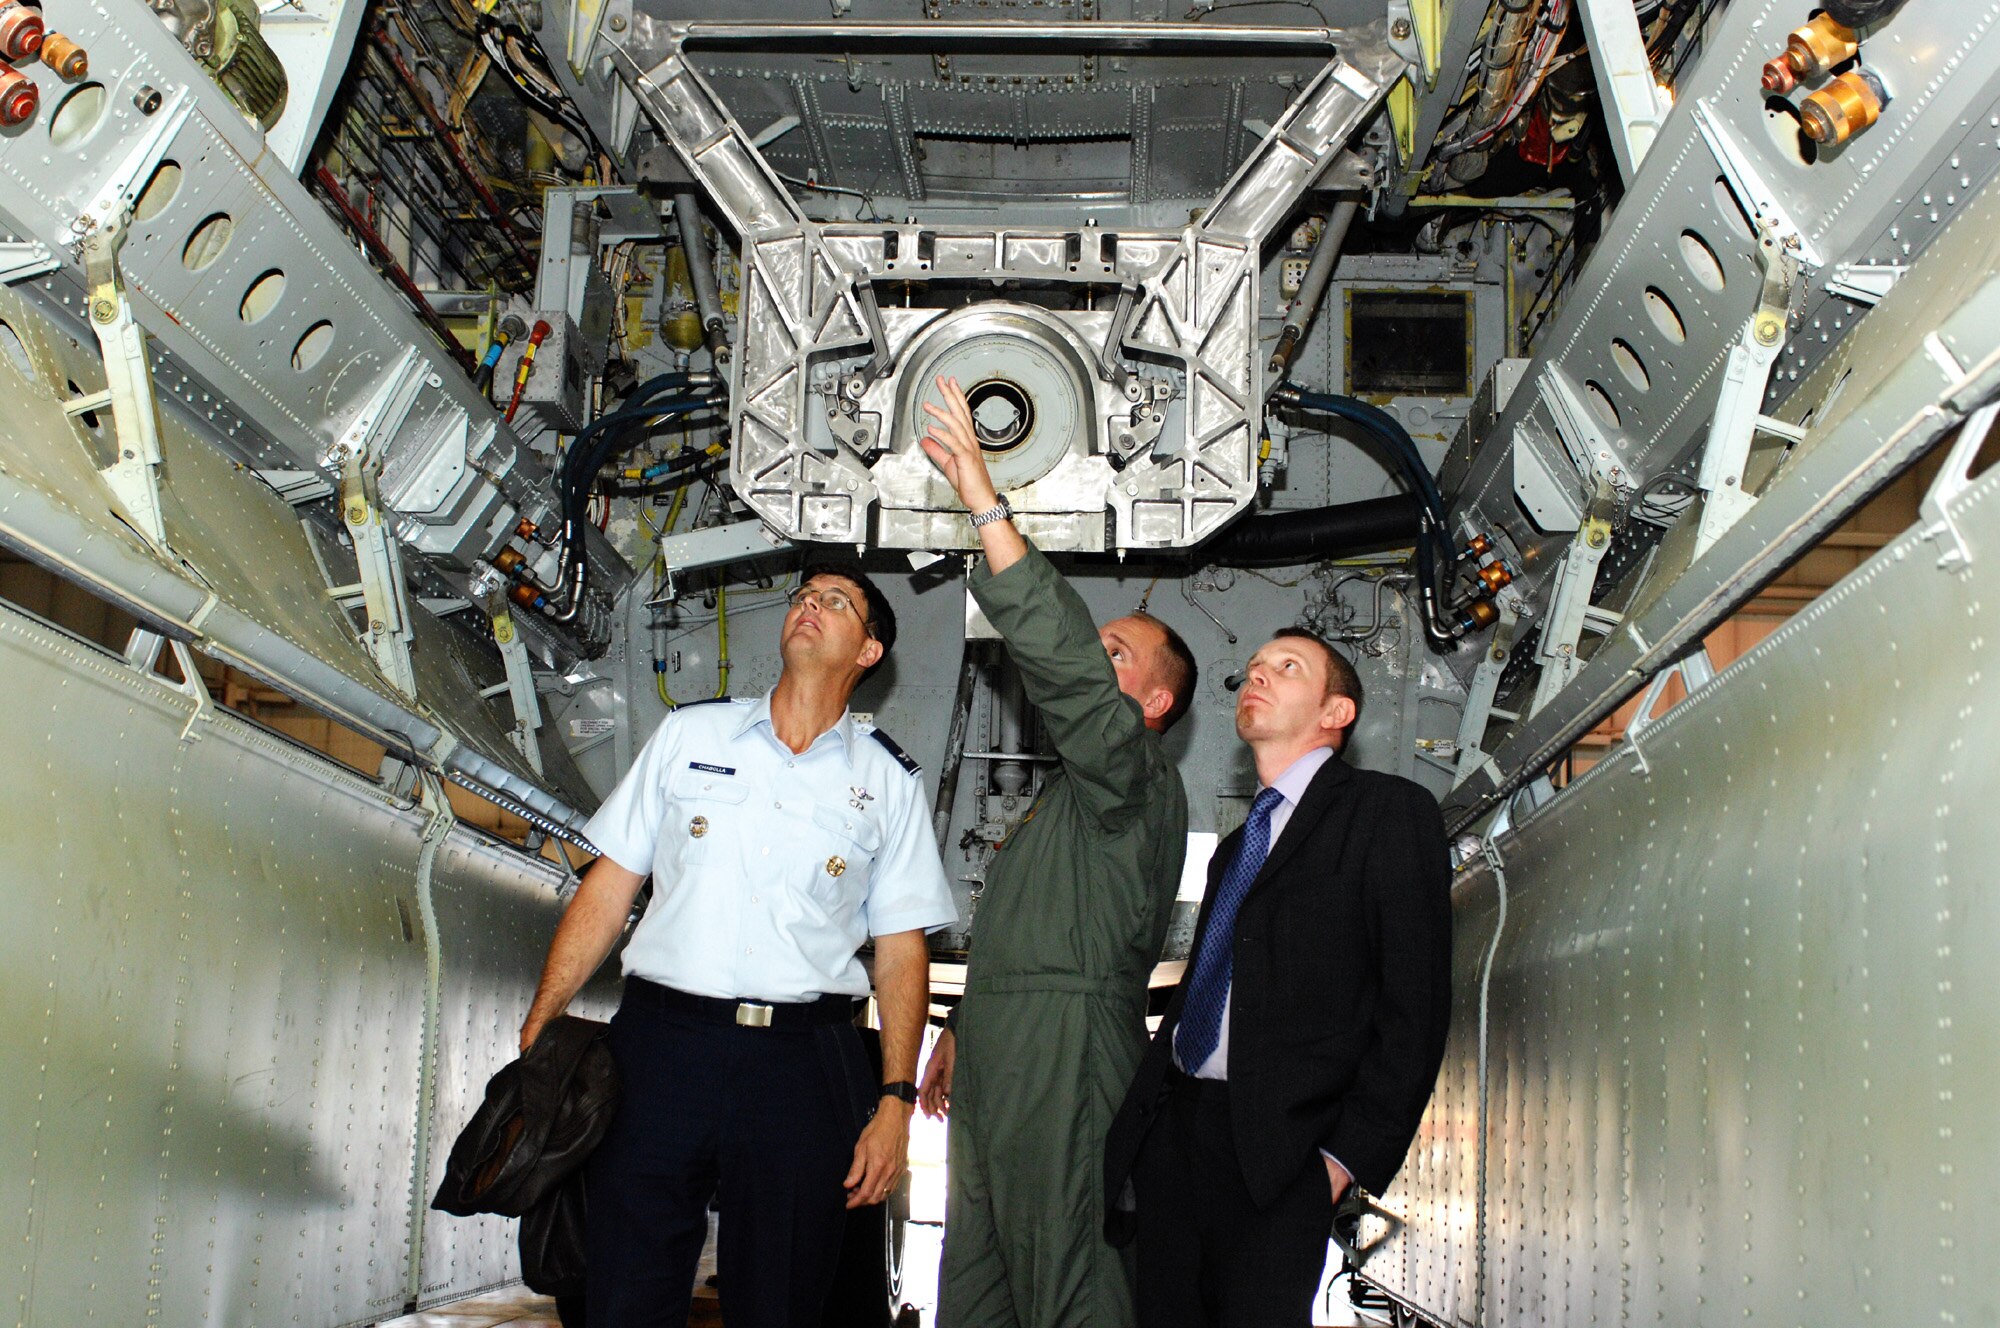 First Lt. Aaron Cook, 23rd Bomb Squadron, (middle), explains the inside of the payload bay of a B-52H Stratofortress, to Col. Steve Chabolla, Office of the Secretary of Defense Policy, and Nigel Basing, British Ministry of Defence, during a delegation visit here Oct. 5.